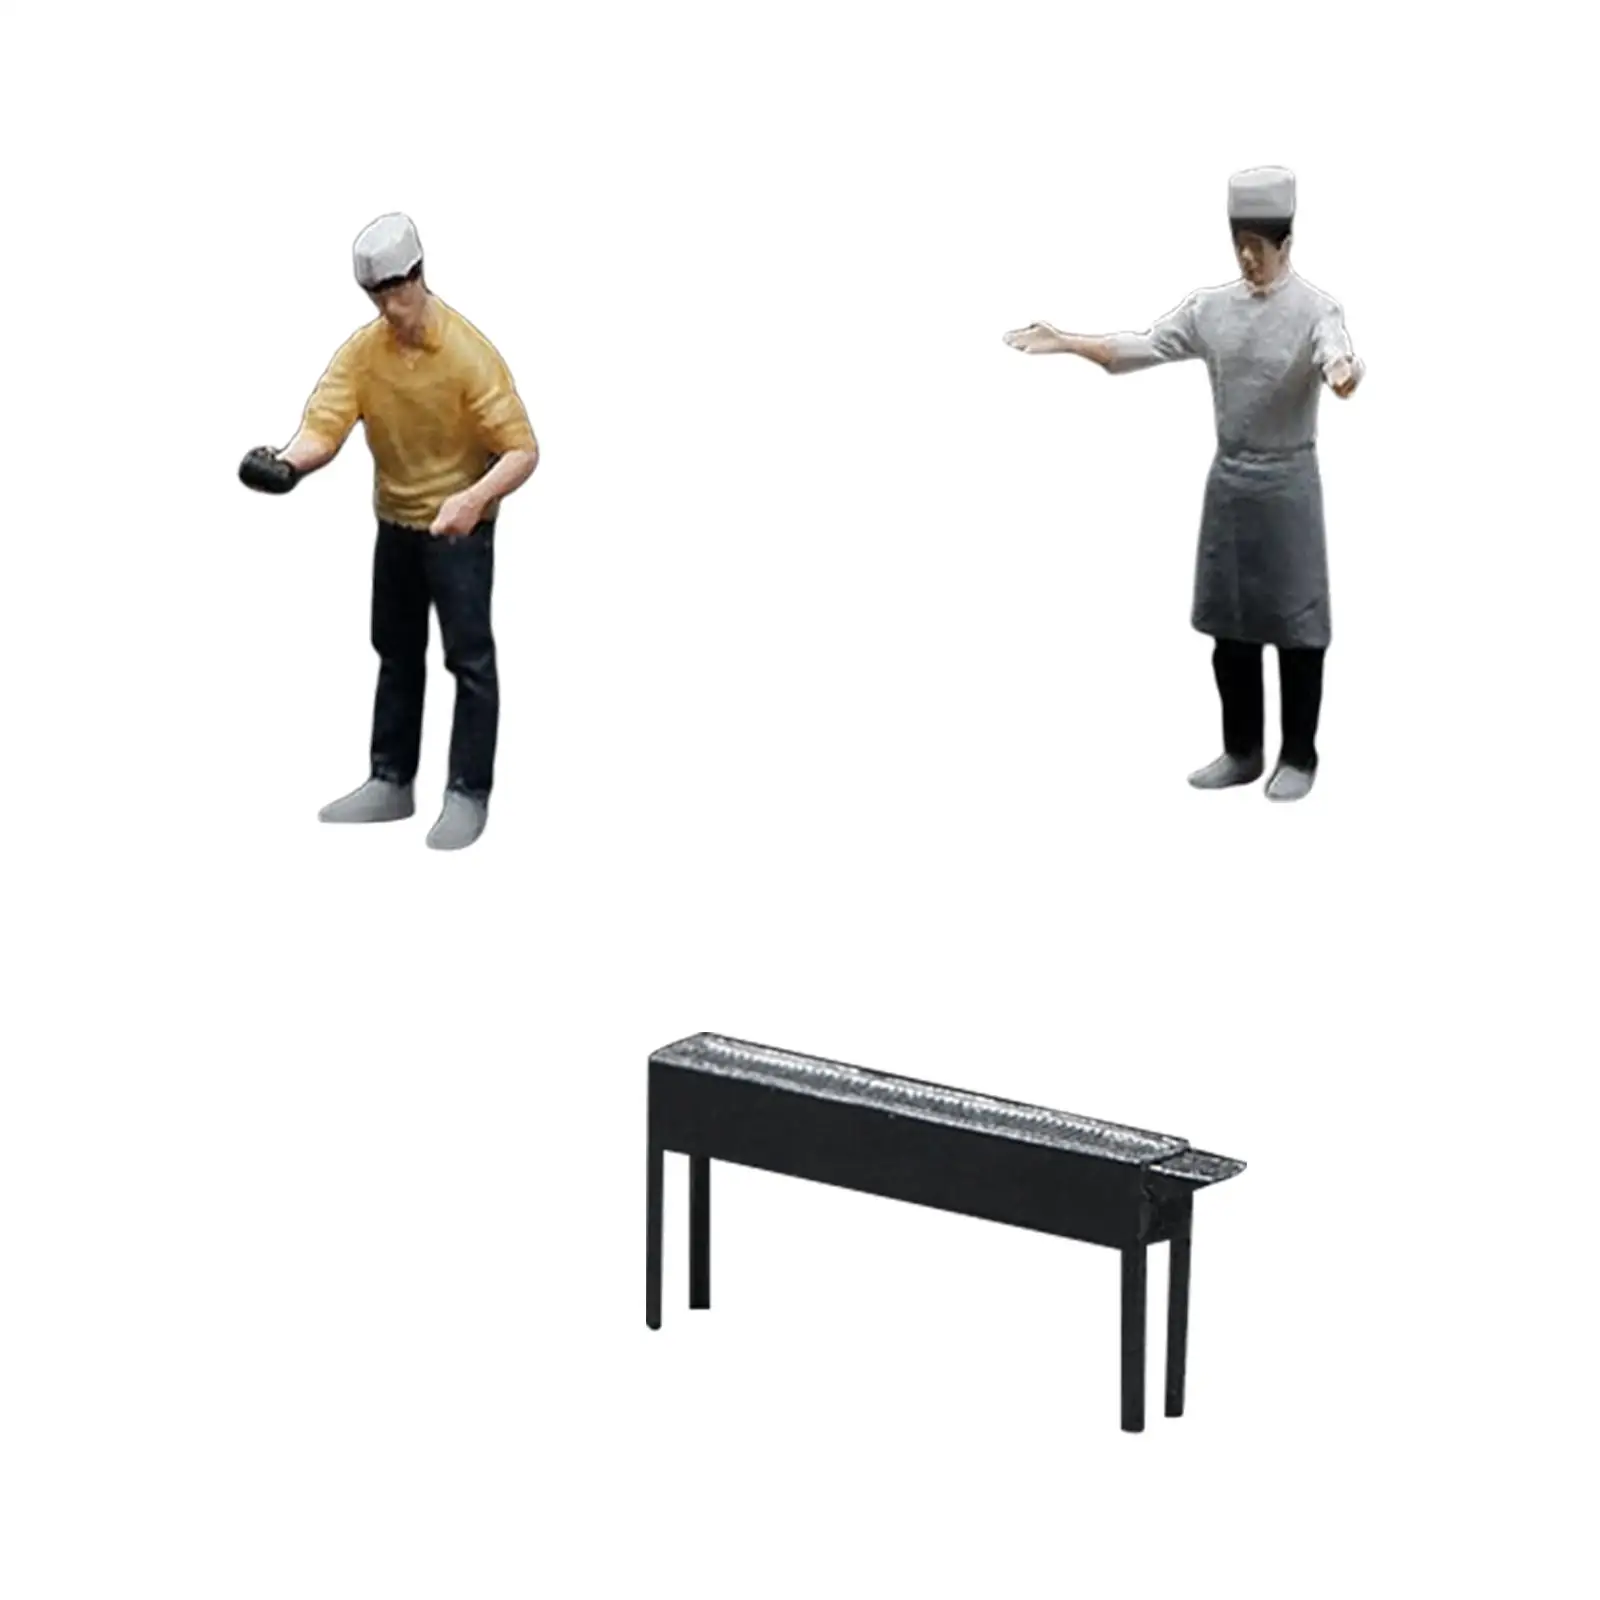 Resin 1/64 BBQ Chef Figures Miniature Movie Props Collections Decoration